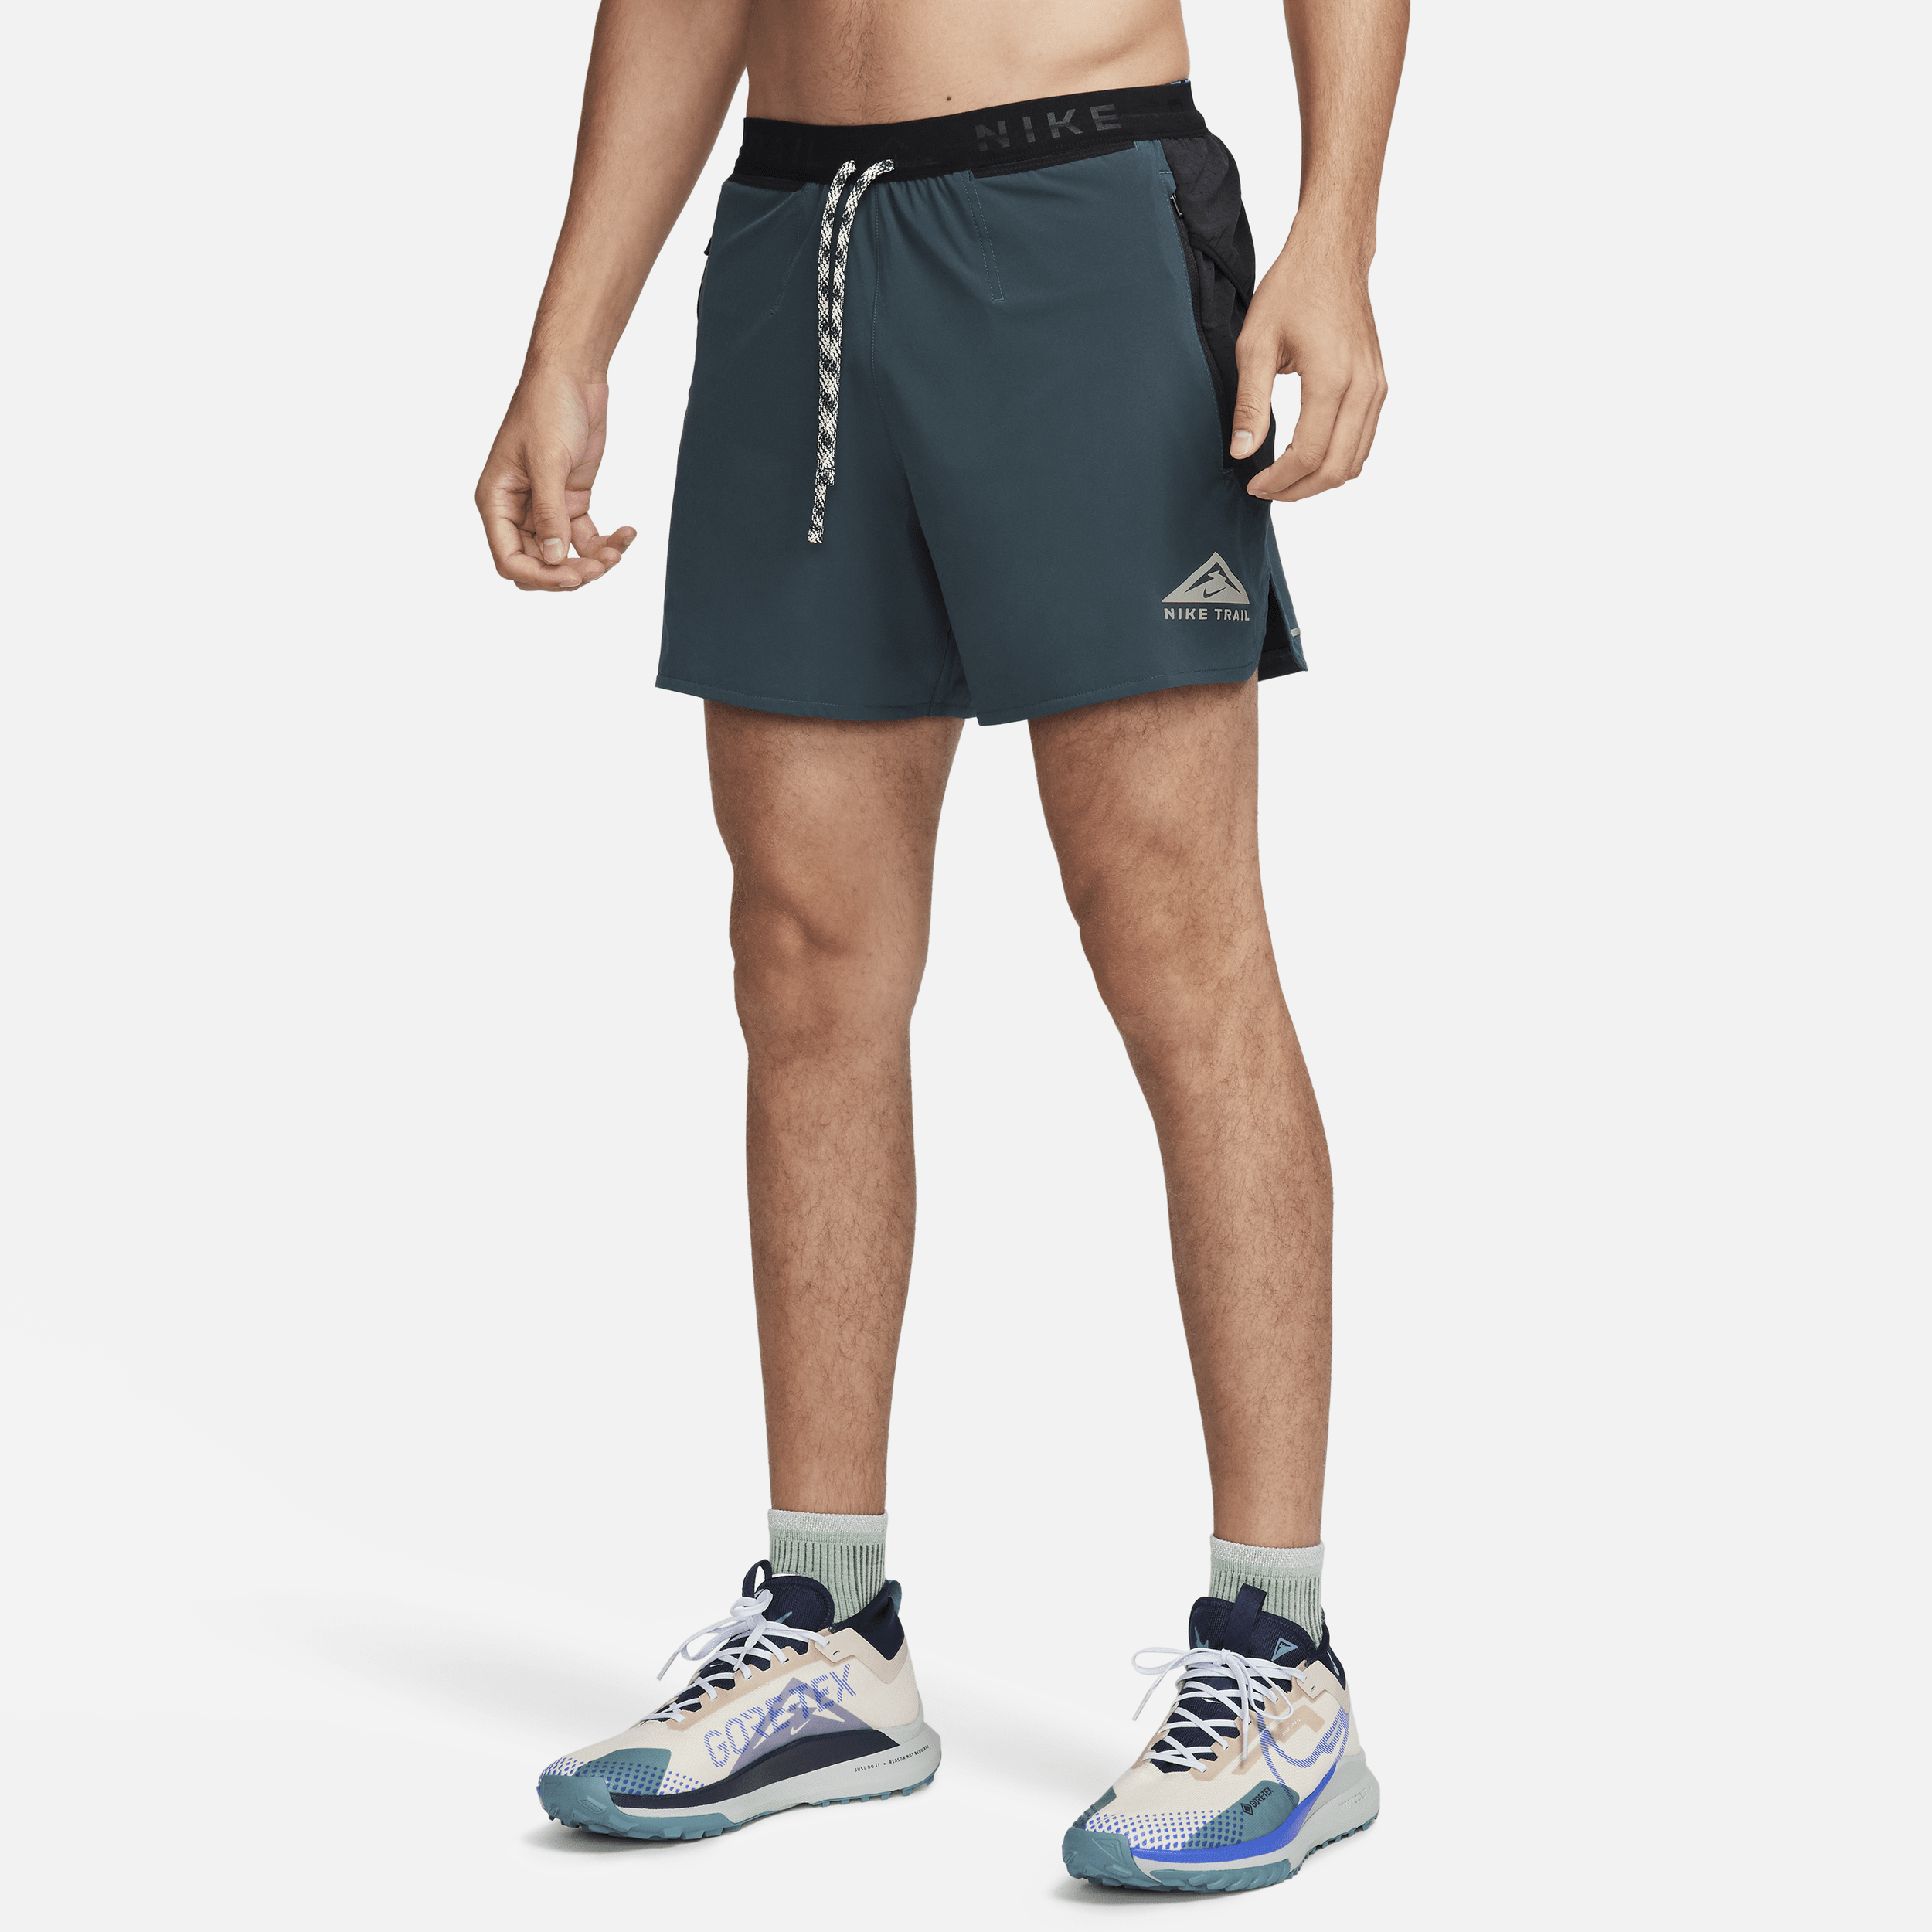 NIKE MEN'S TRAIL SECOND SUNRISE DRI-FIT 5" BRIEF-LINED RUNNING SHORTS,1012994694